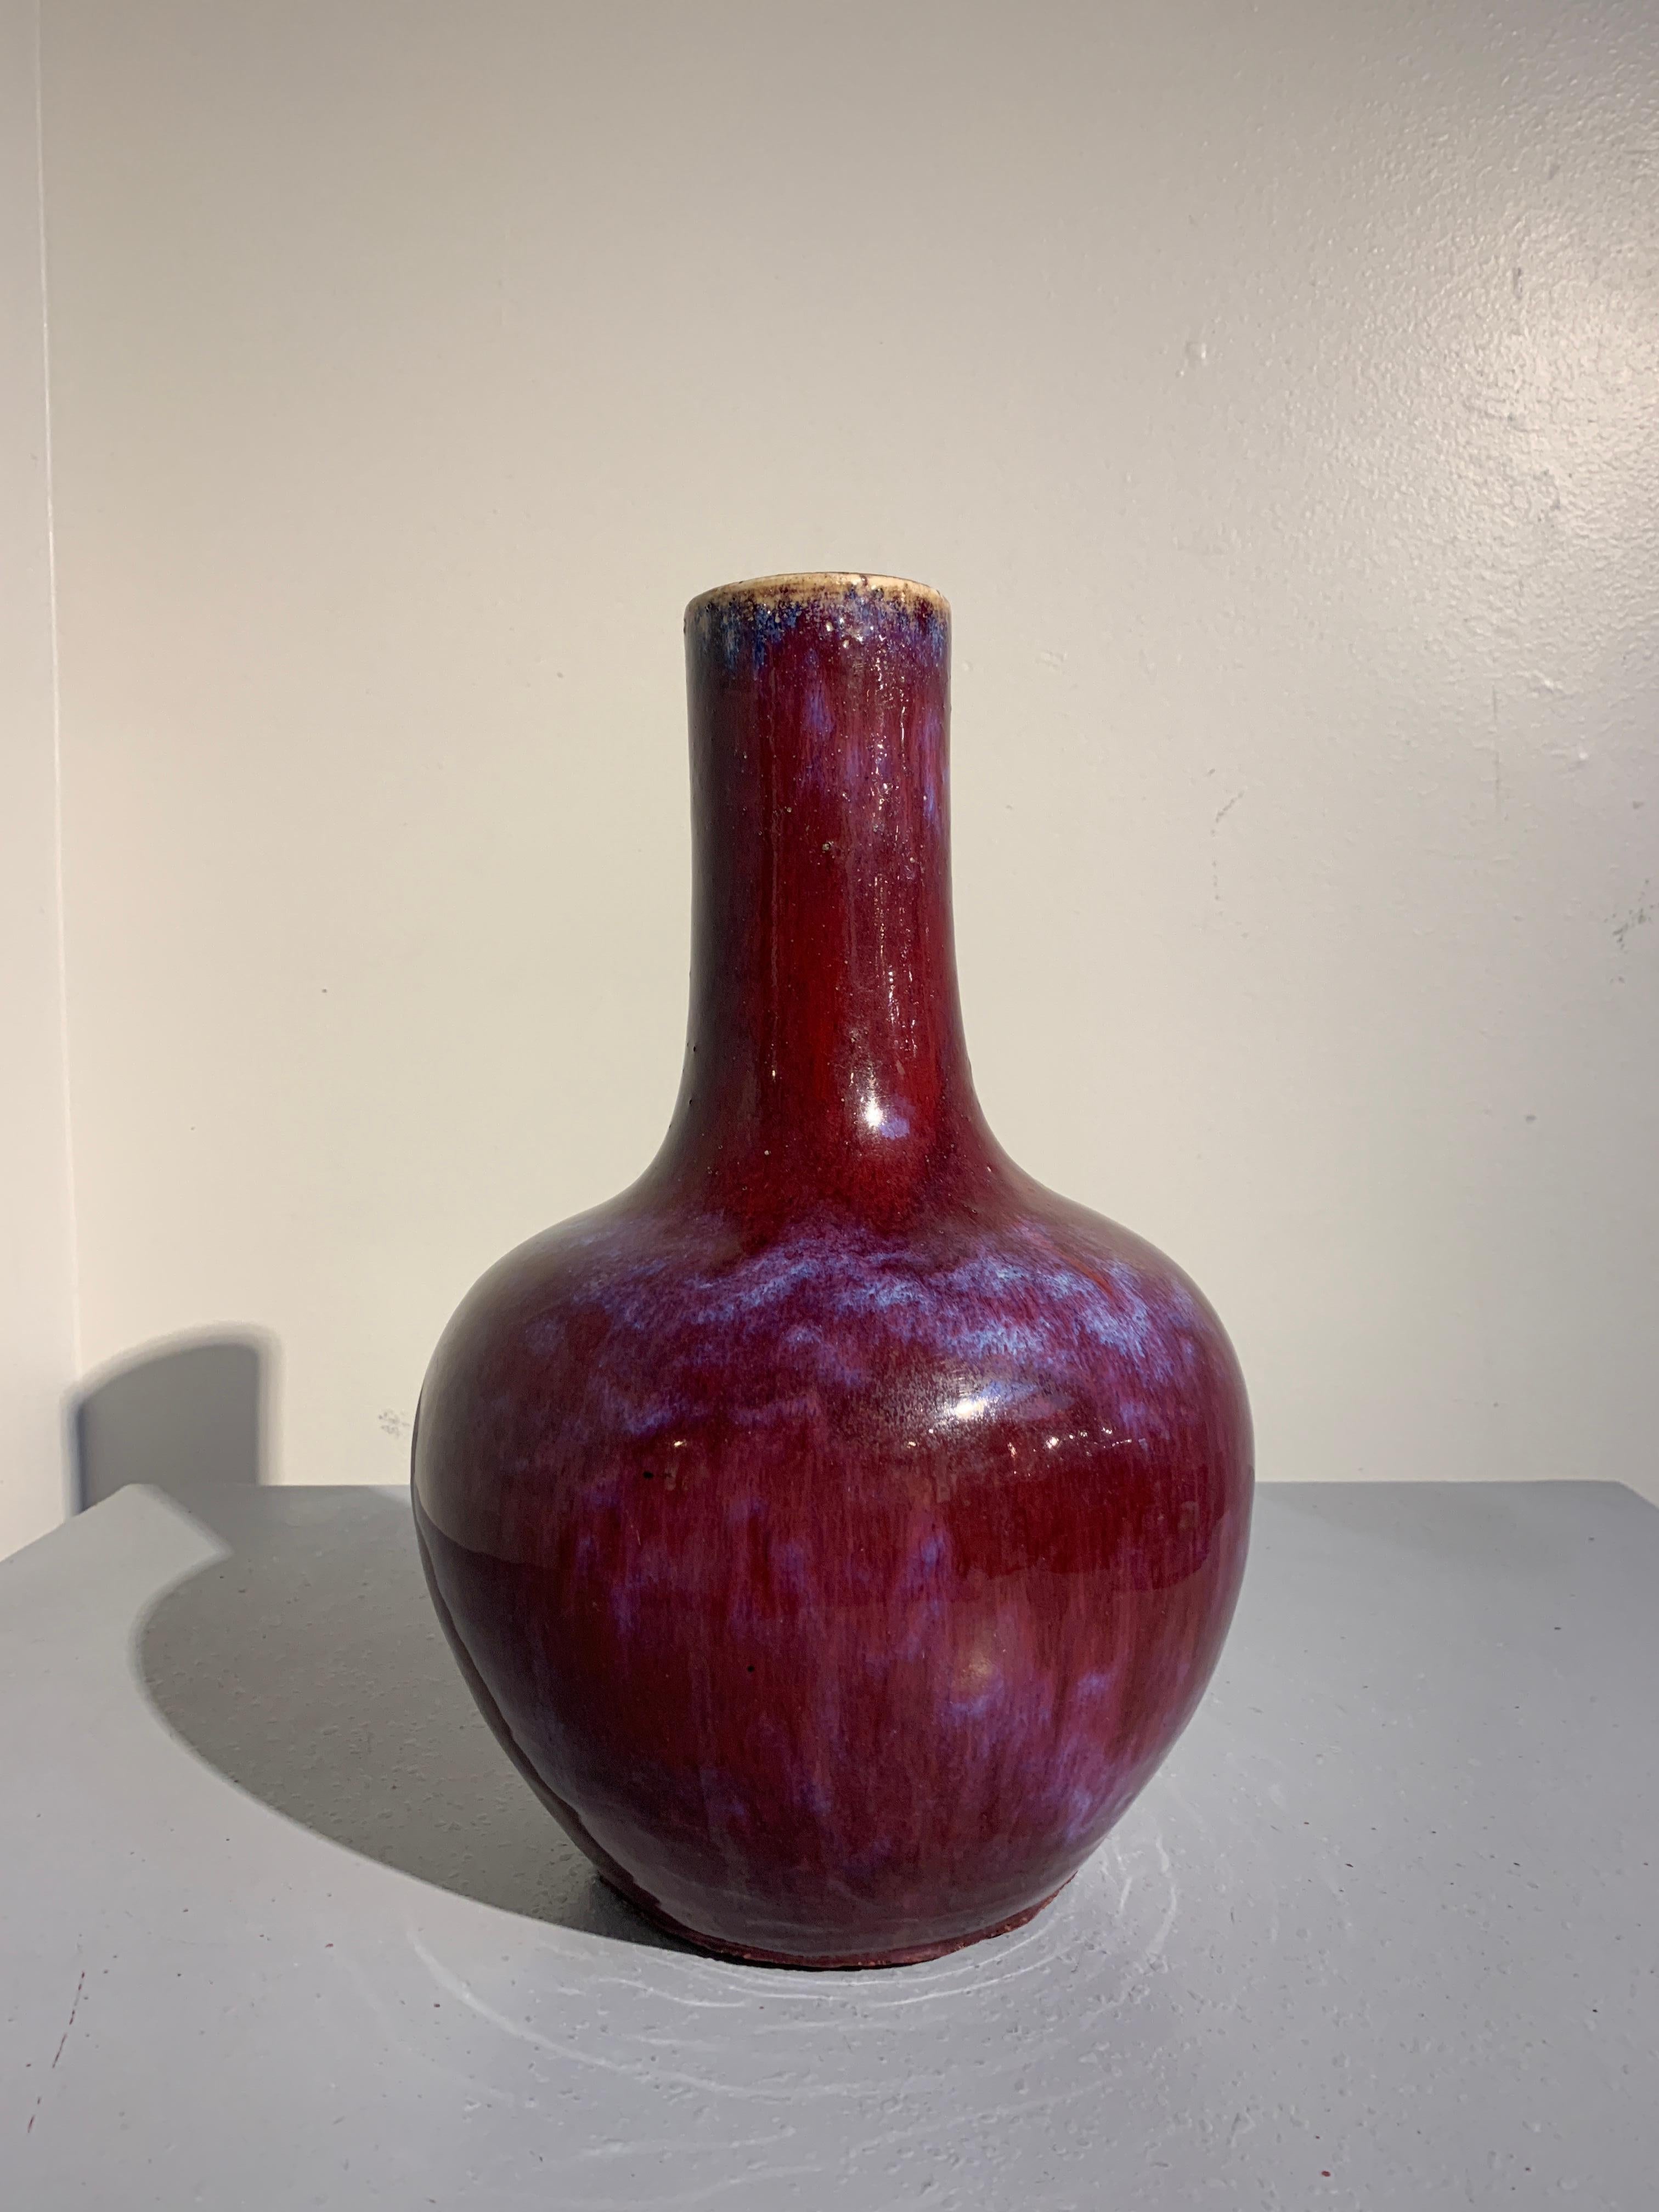 A gorgeous Chinese monochrome red flambé glazed bottle vase, called a tianqiuping, Qing Dynasty, late 19th century. 

The voluptuous body of the vase of globular form, rising to broad shoulders and a tall stick neck. The vase is covered in a